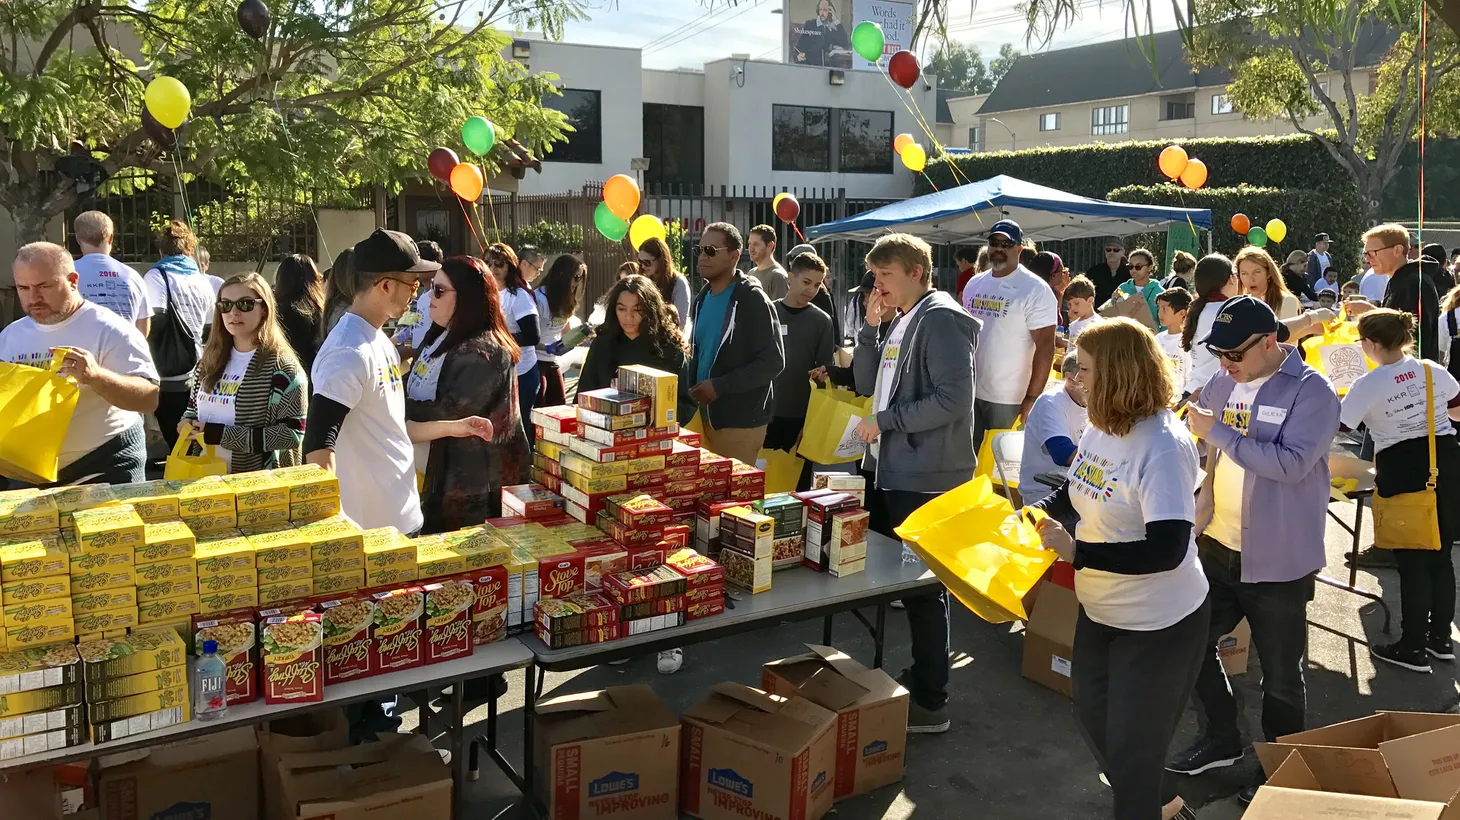 Big Sunday hosts their Thanksgiving food handout in 2016.